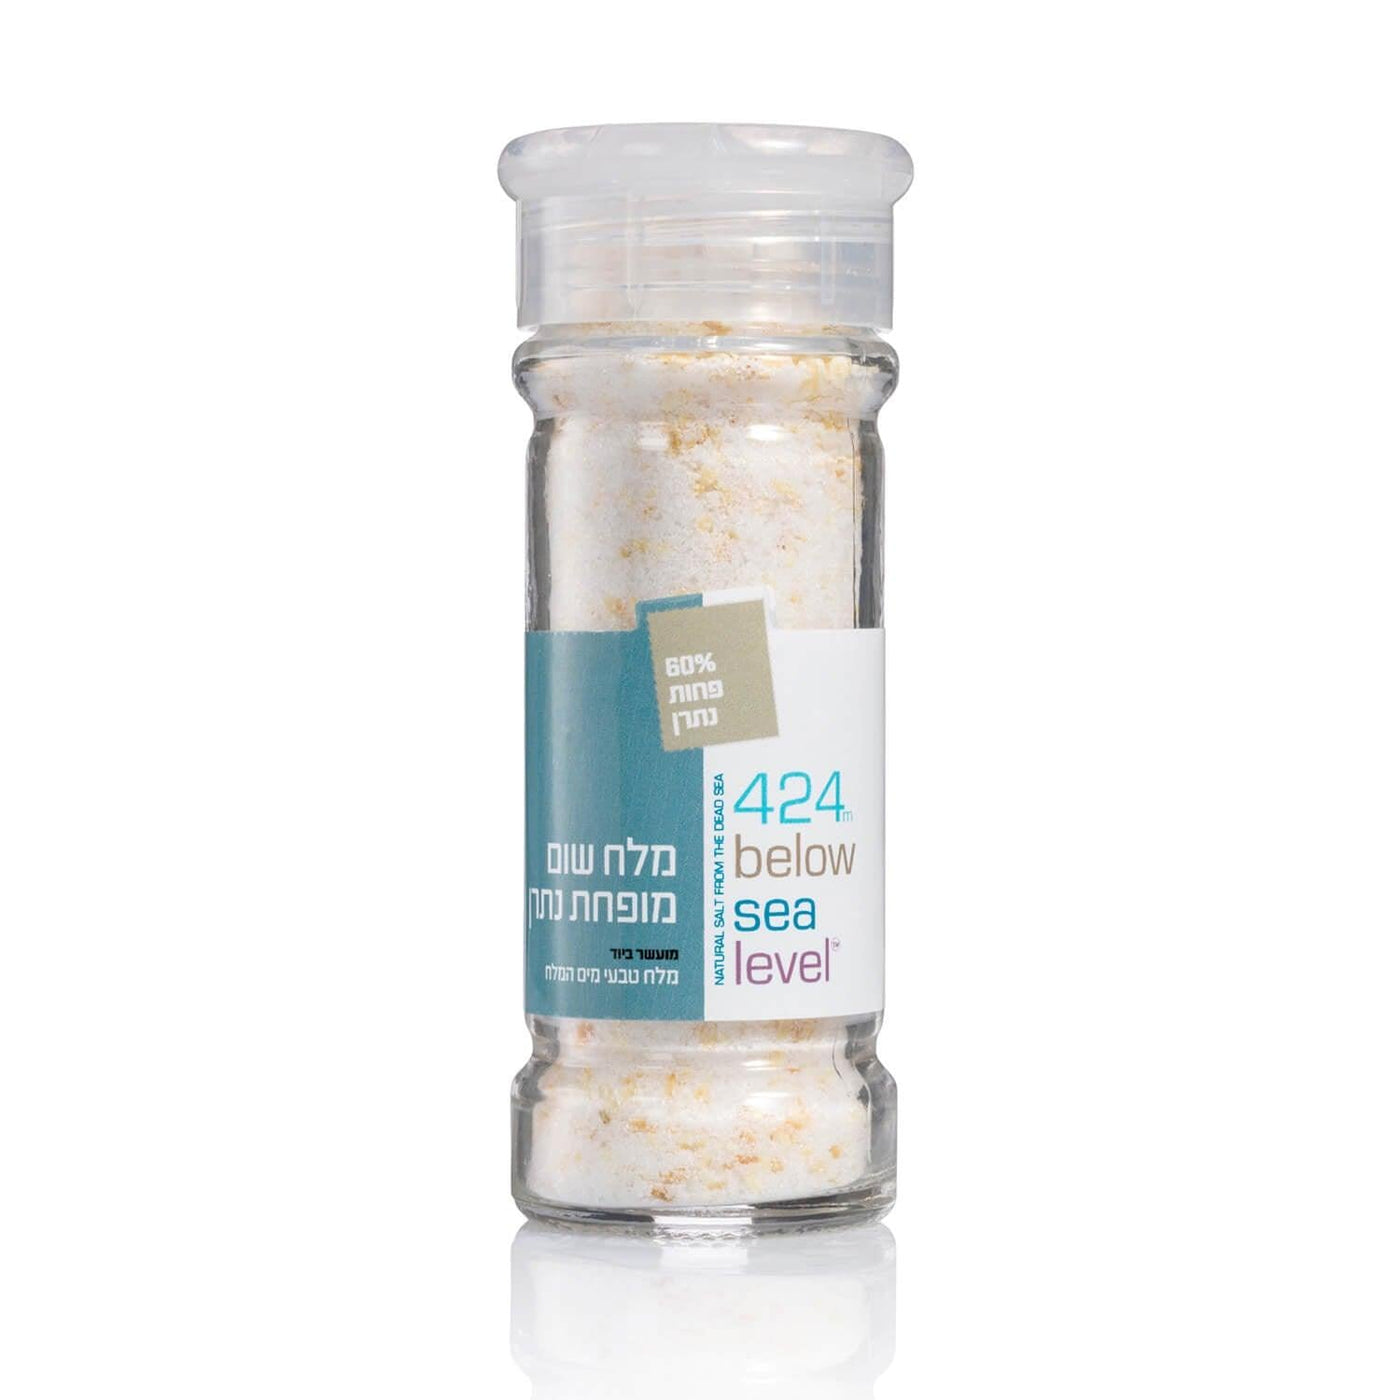 Low Sodium Garlic Salt Enriched With Fiber from the Dead Sea - Spring Nahal